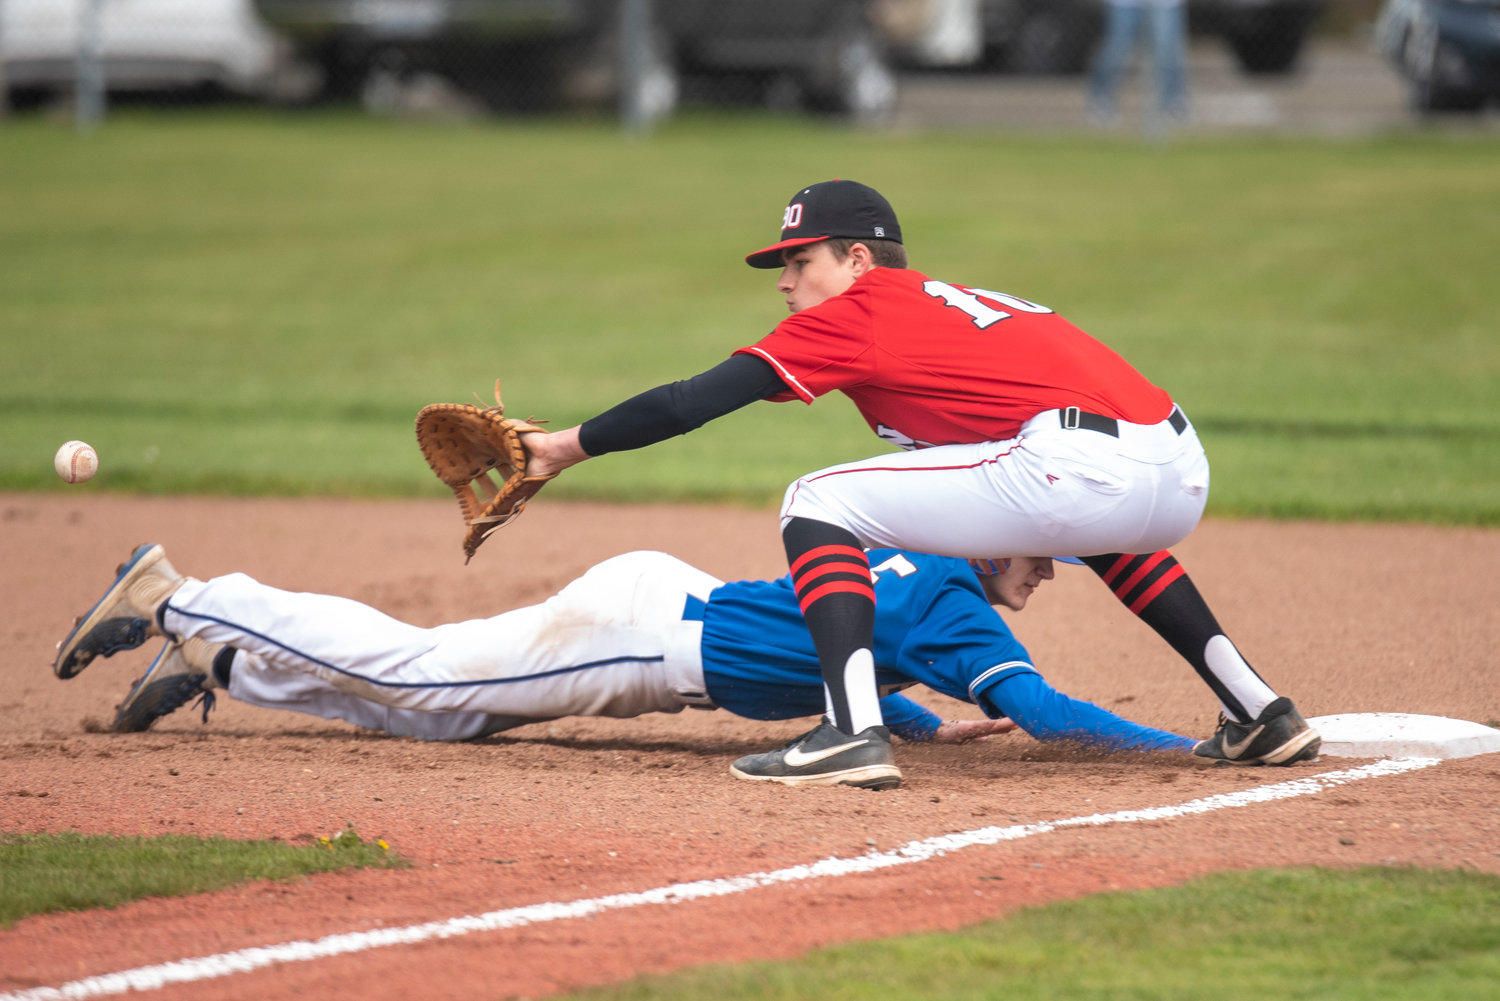 Tenino first baseman Jack Burkhardt awaits a pickoff attempt from pitcher Brody Noonan during a home game against Elma on April 29.